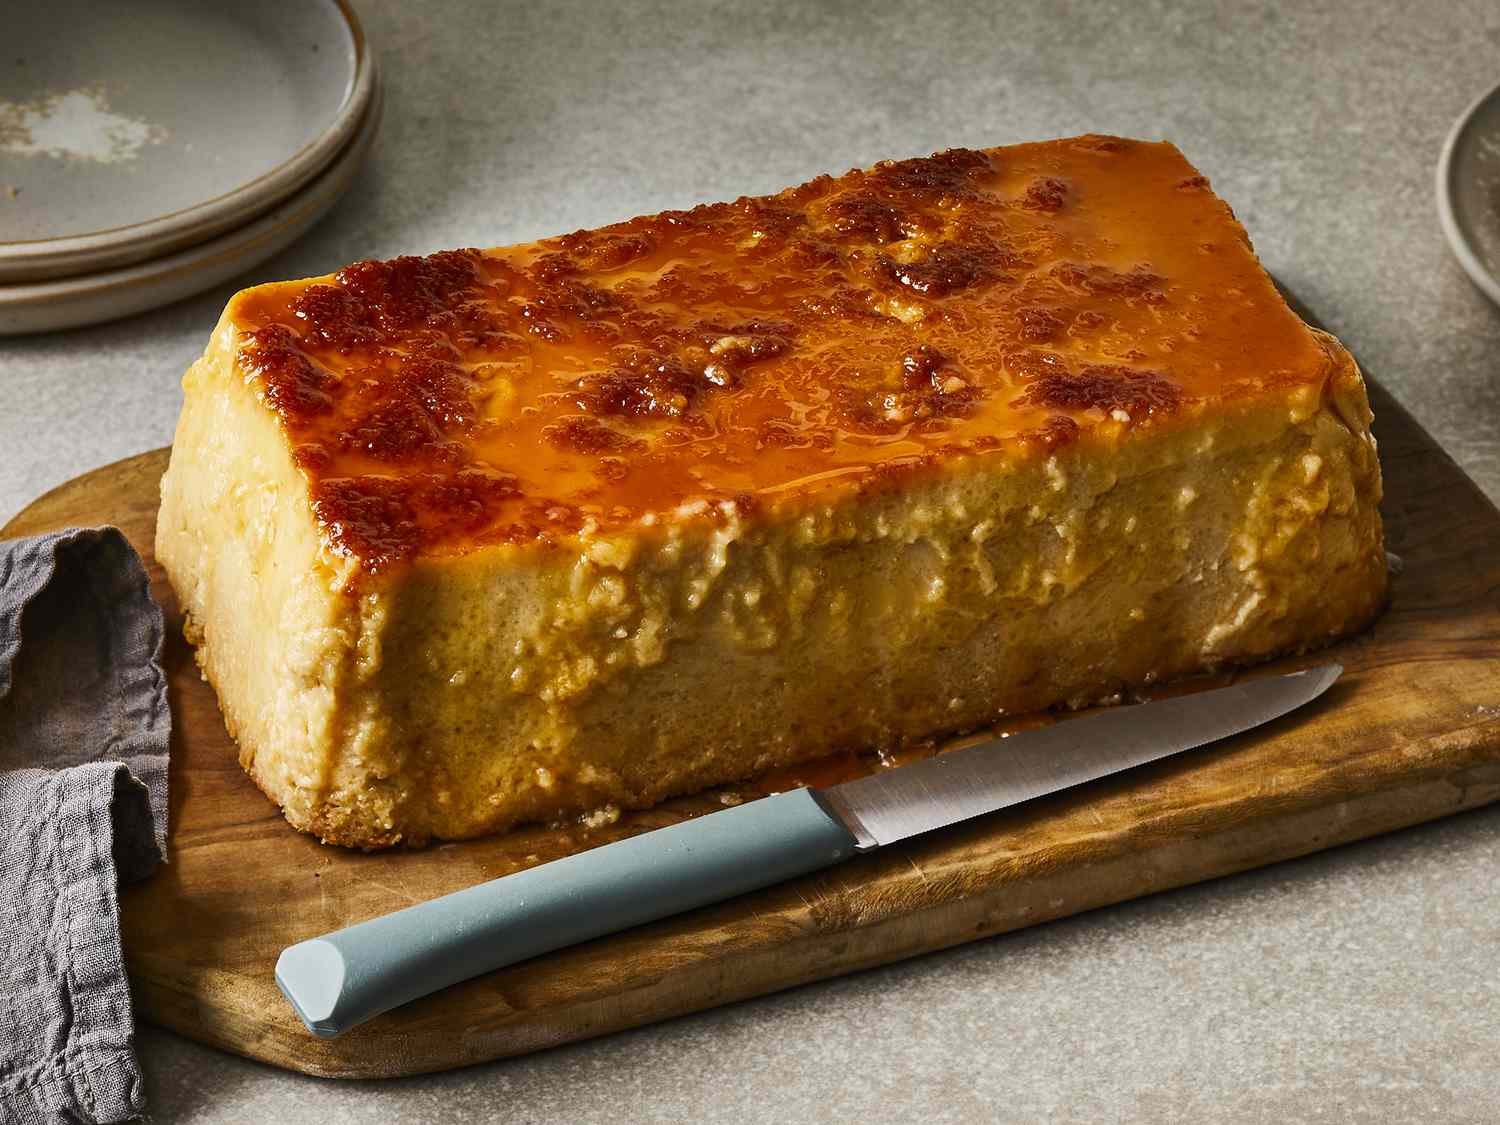 close up view of Budin (Puerto Rican Bread Pudding) on a wooden cutting board with a knife